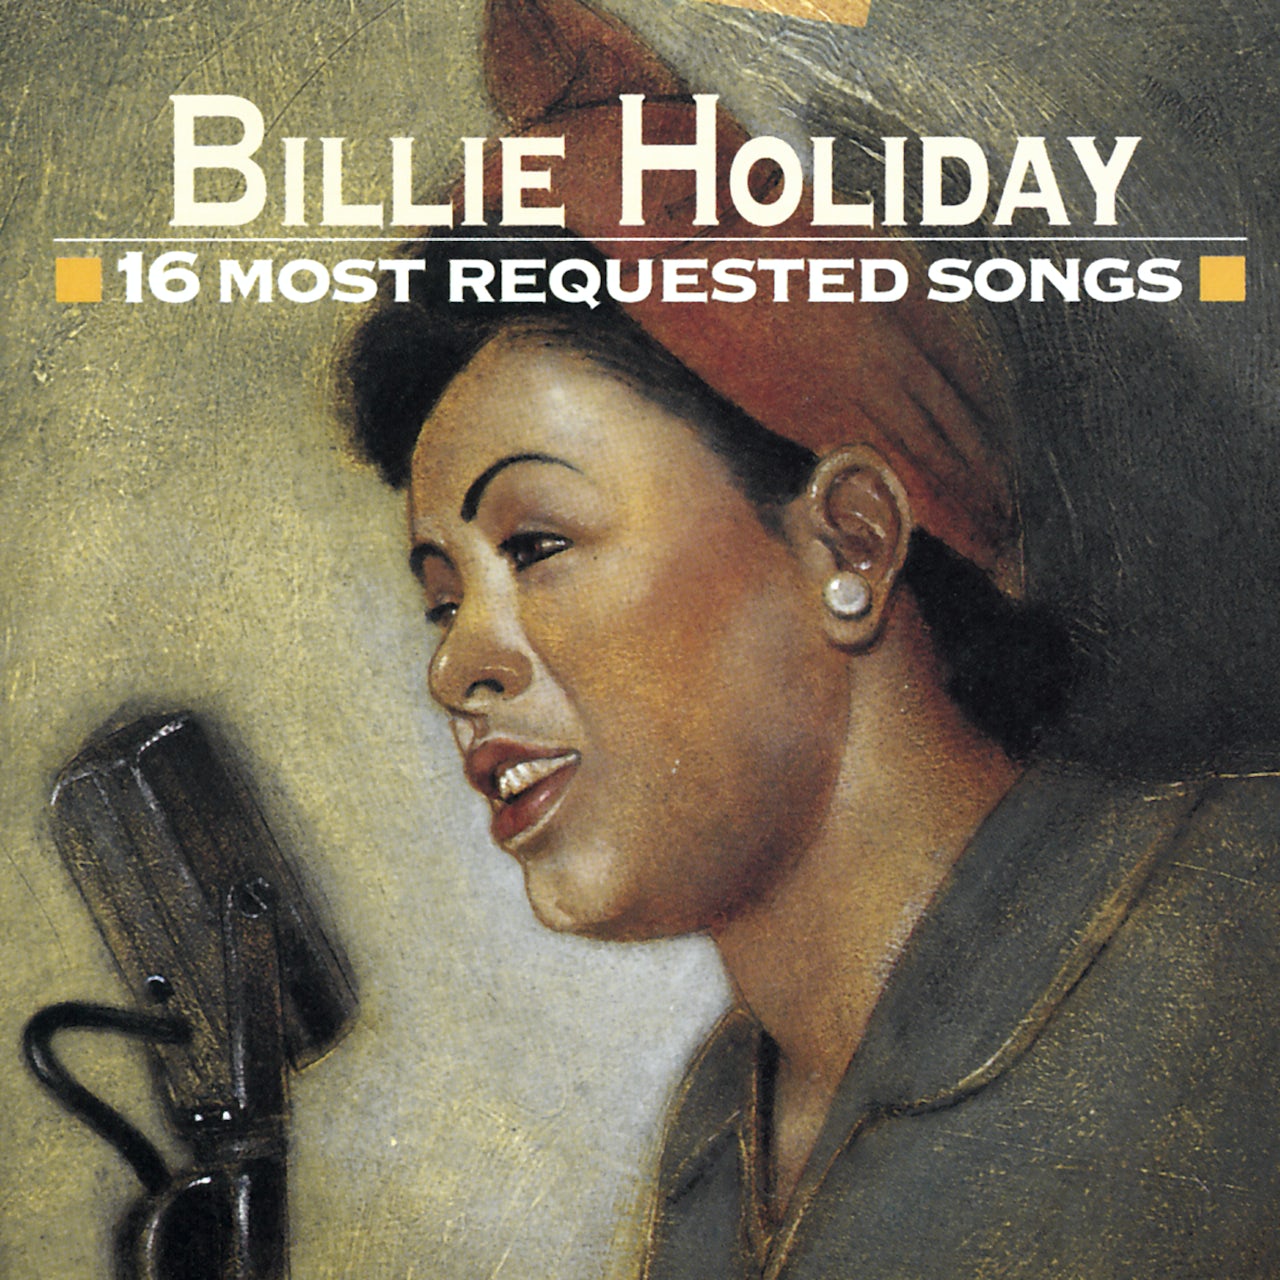 BILLIE HOLIDAY - 16 MOST REQUESTED SONGS